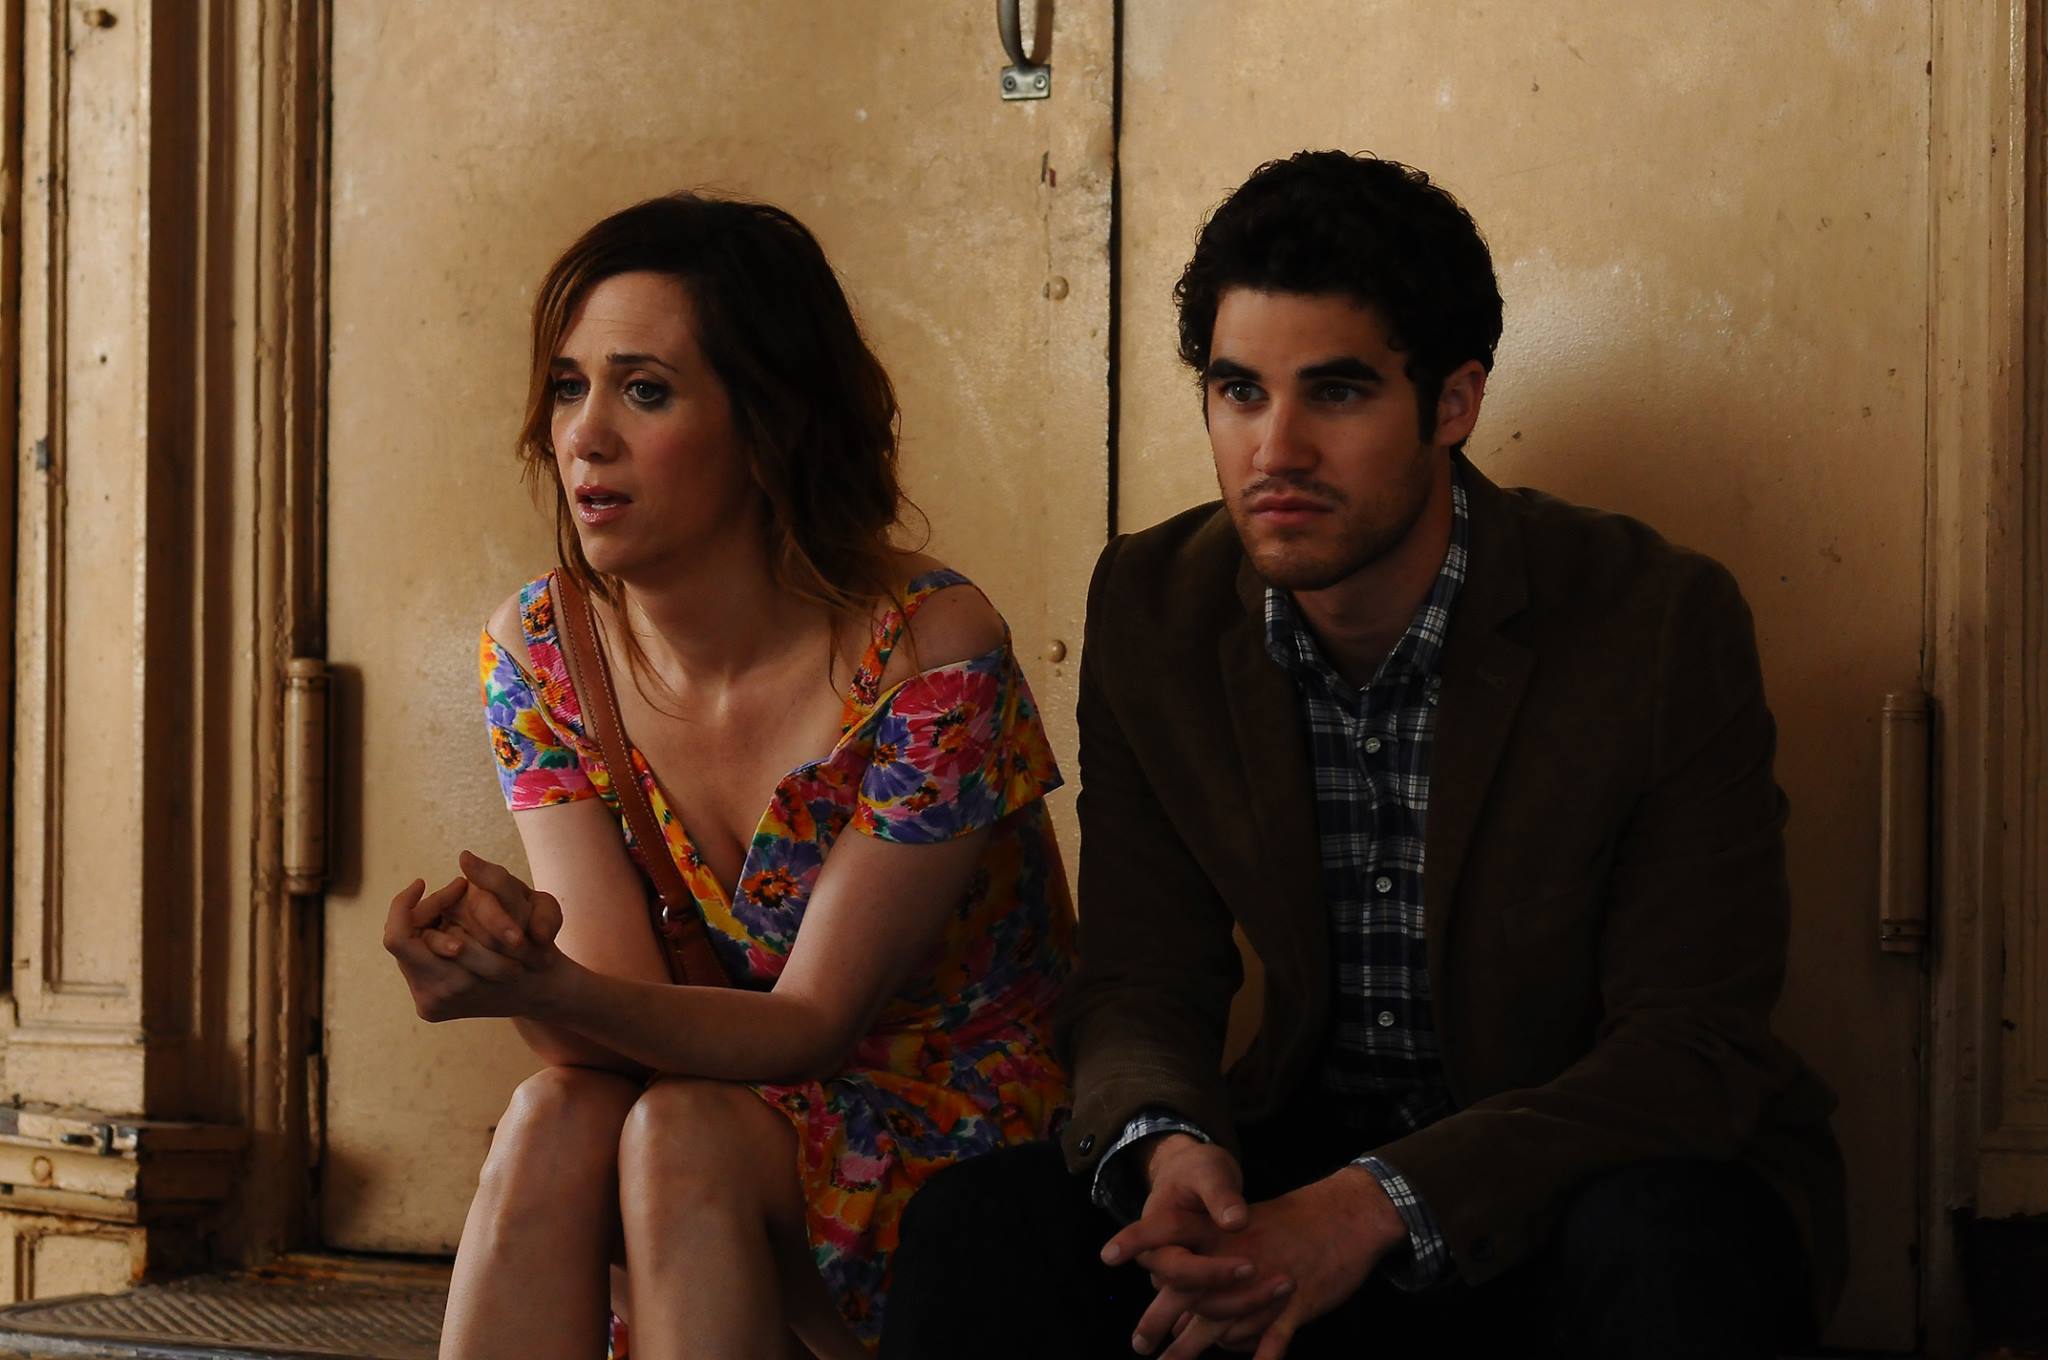 Darren Criss in Girl Most Likely